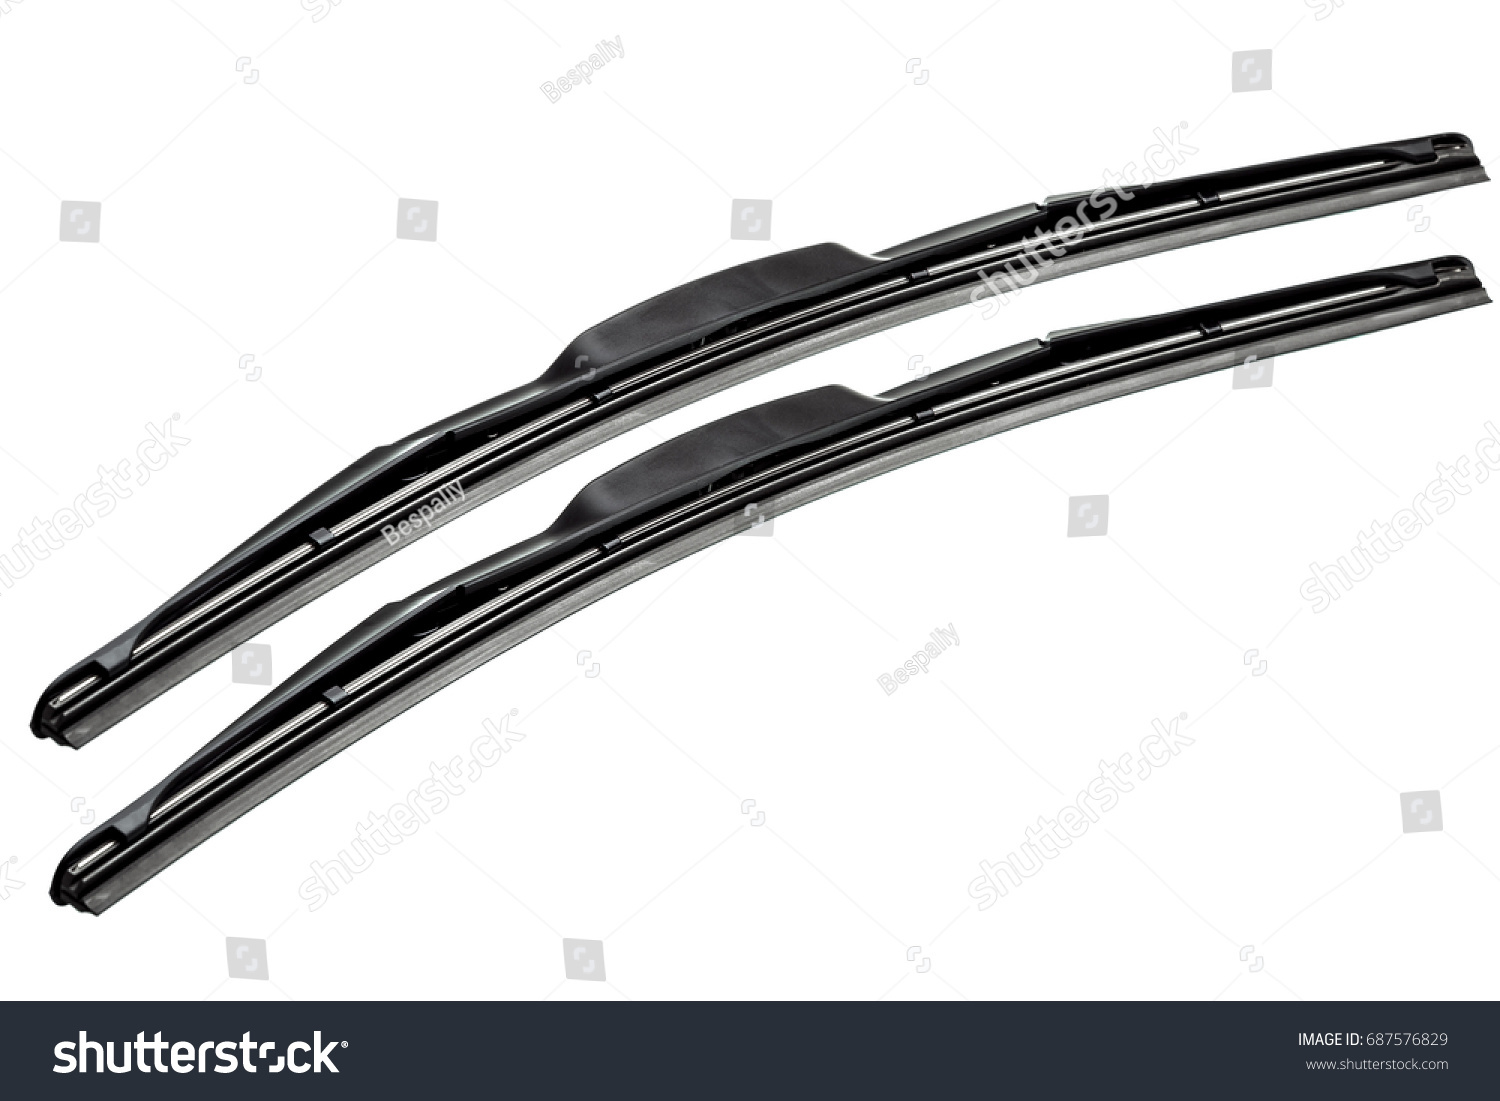 windshield wipers for cars isolated on a white background. #687576829